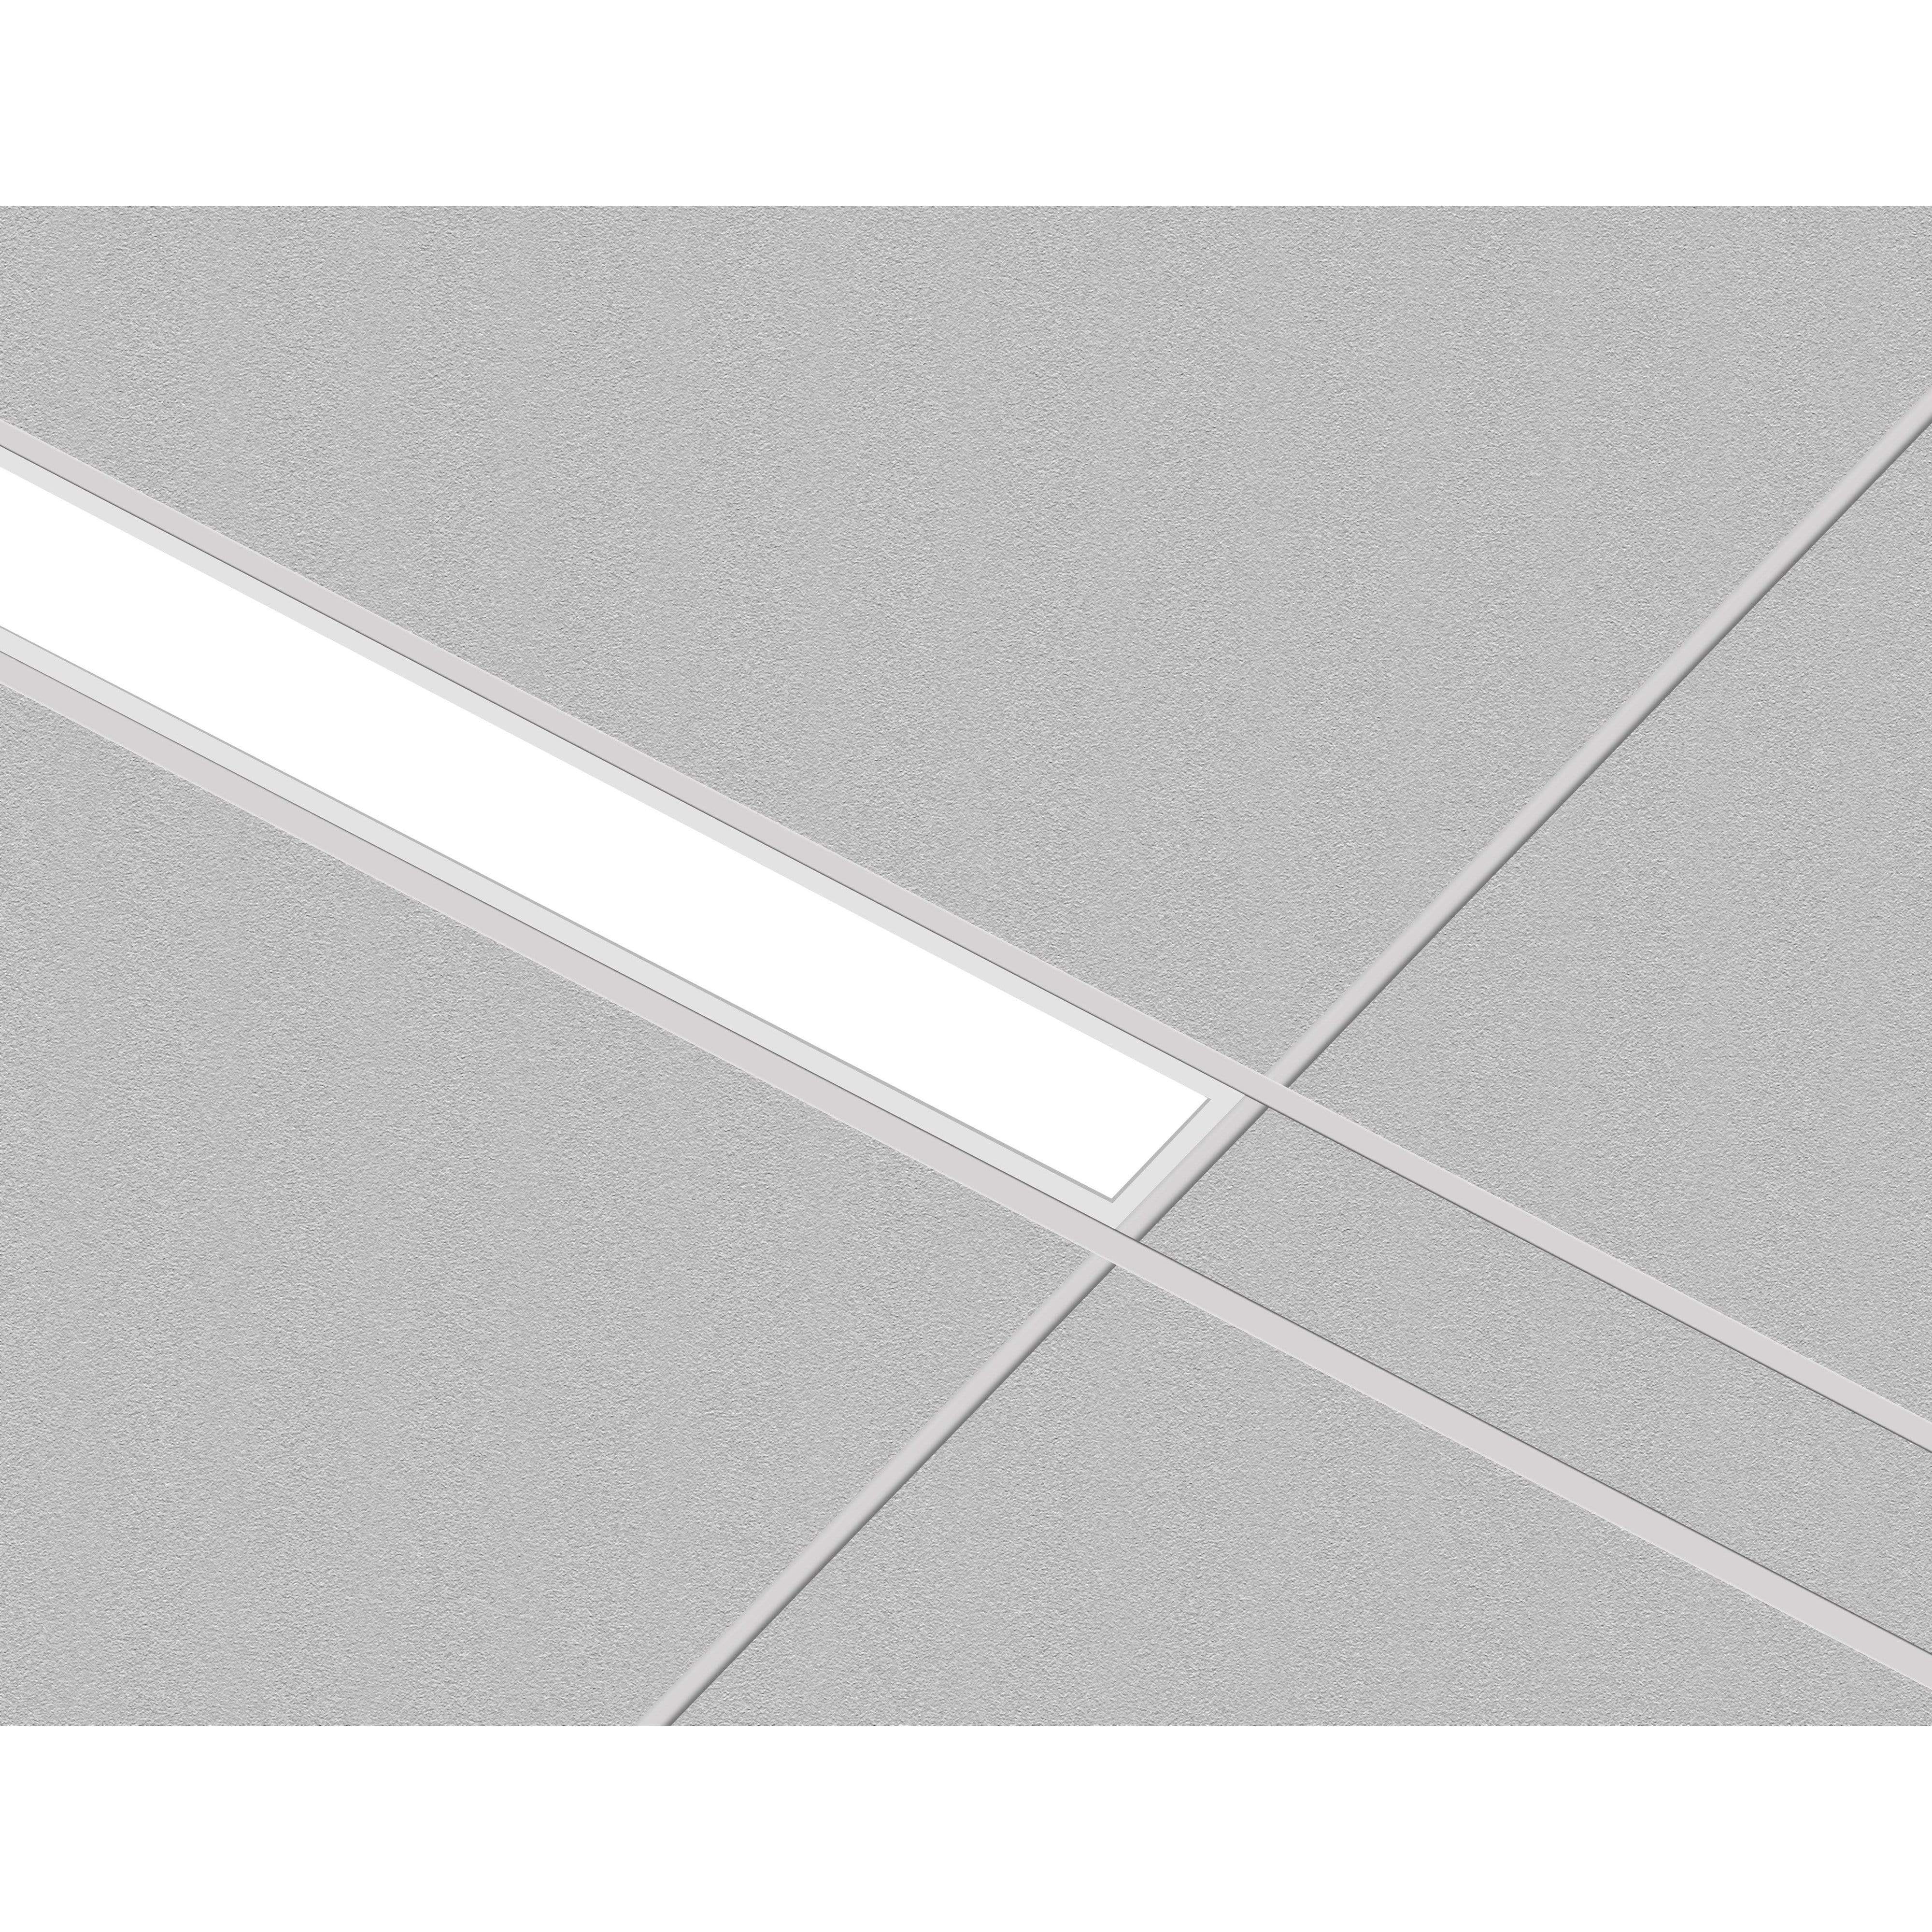 POE Texas Lighting Denton Linear Recessed PoE Lights - 6 in x 2 ft (Surface)